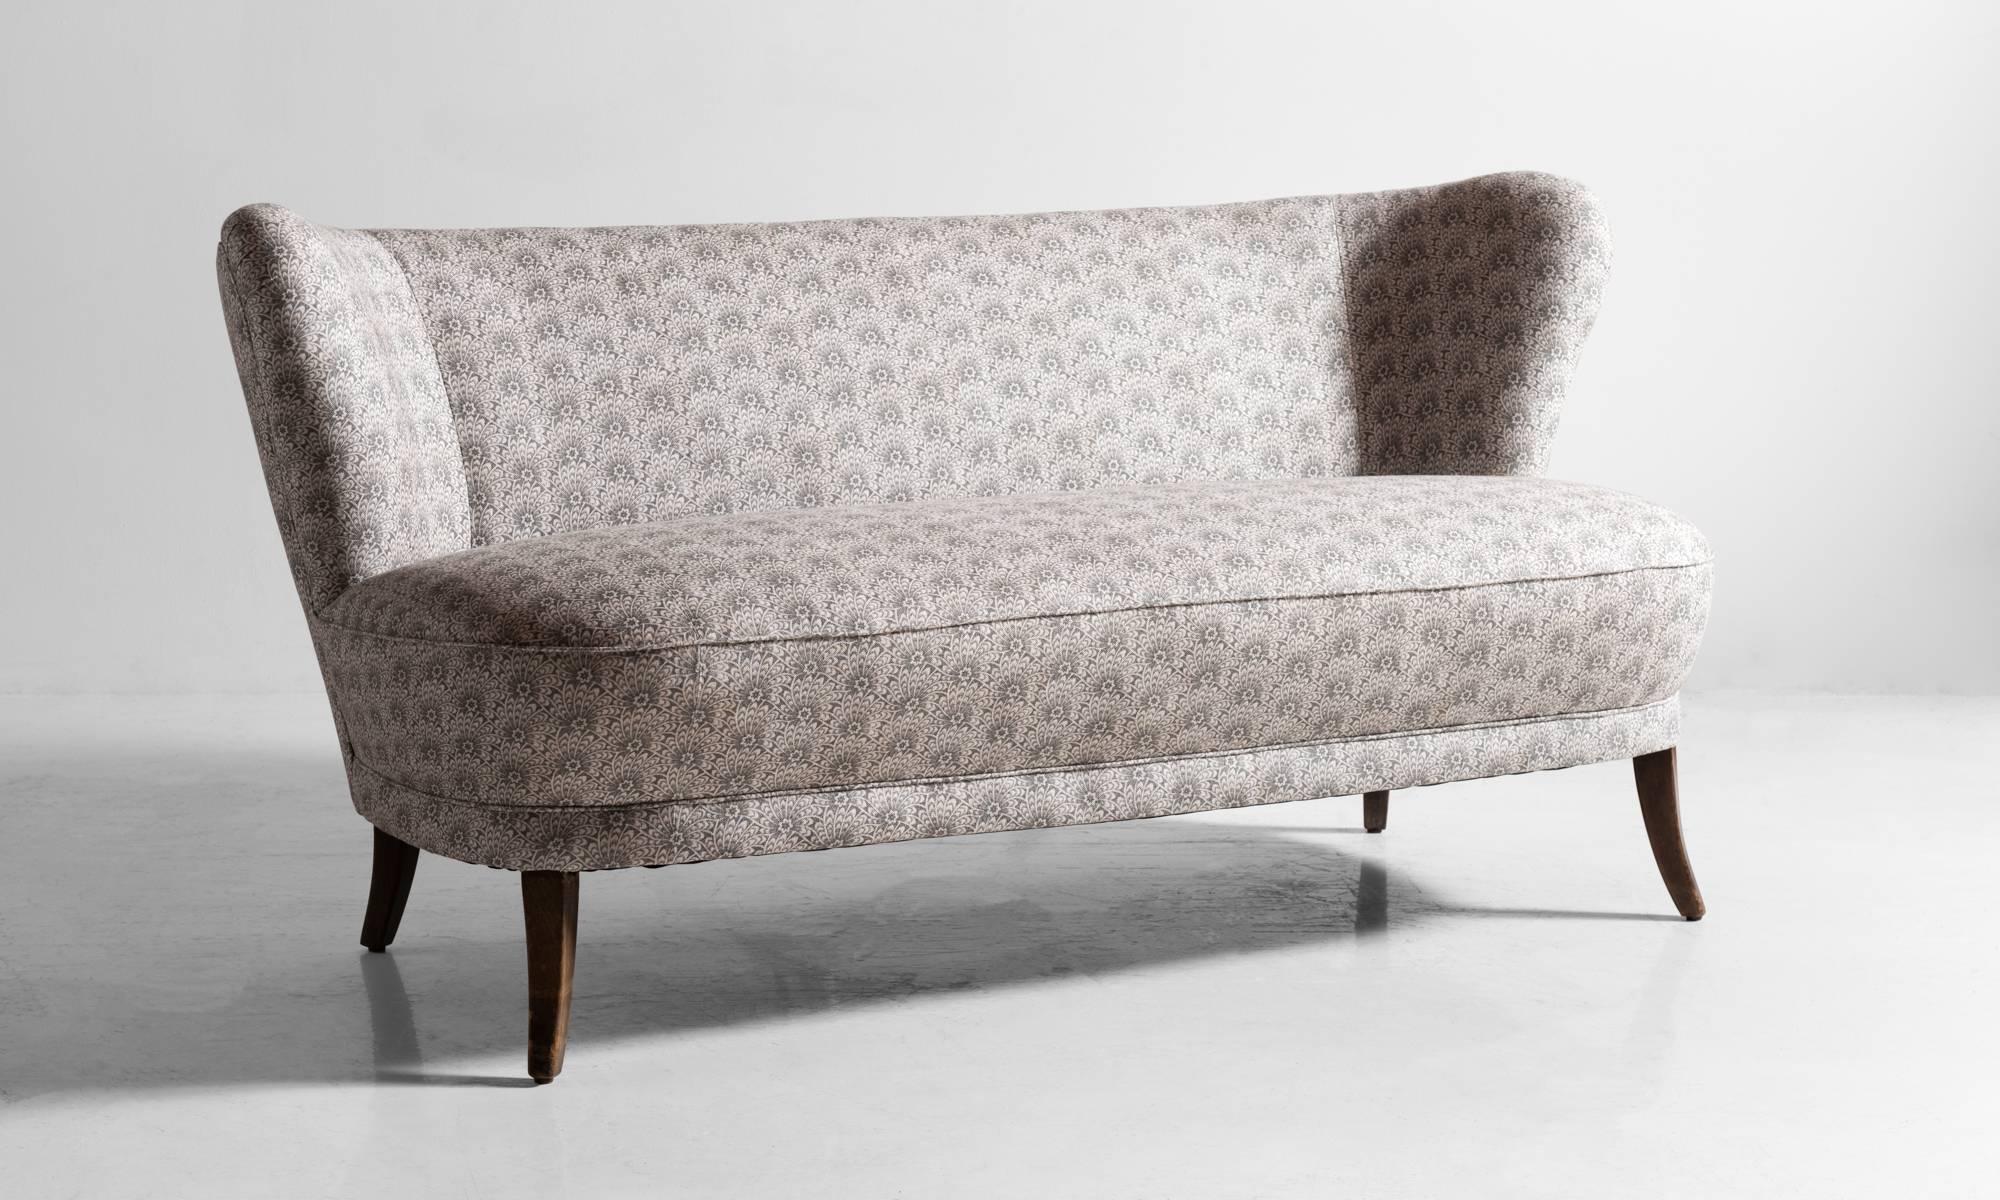 Cotton-linen cocktail sofa, Netherlands, circa 1950

Petite sized and elegant form, reupholstered in Liberty of London cotton-linen fabric.